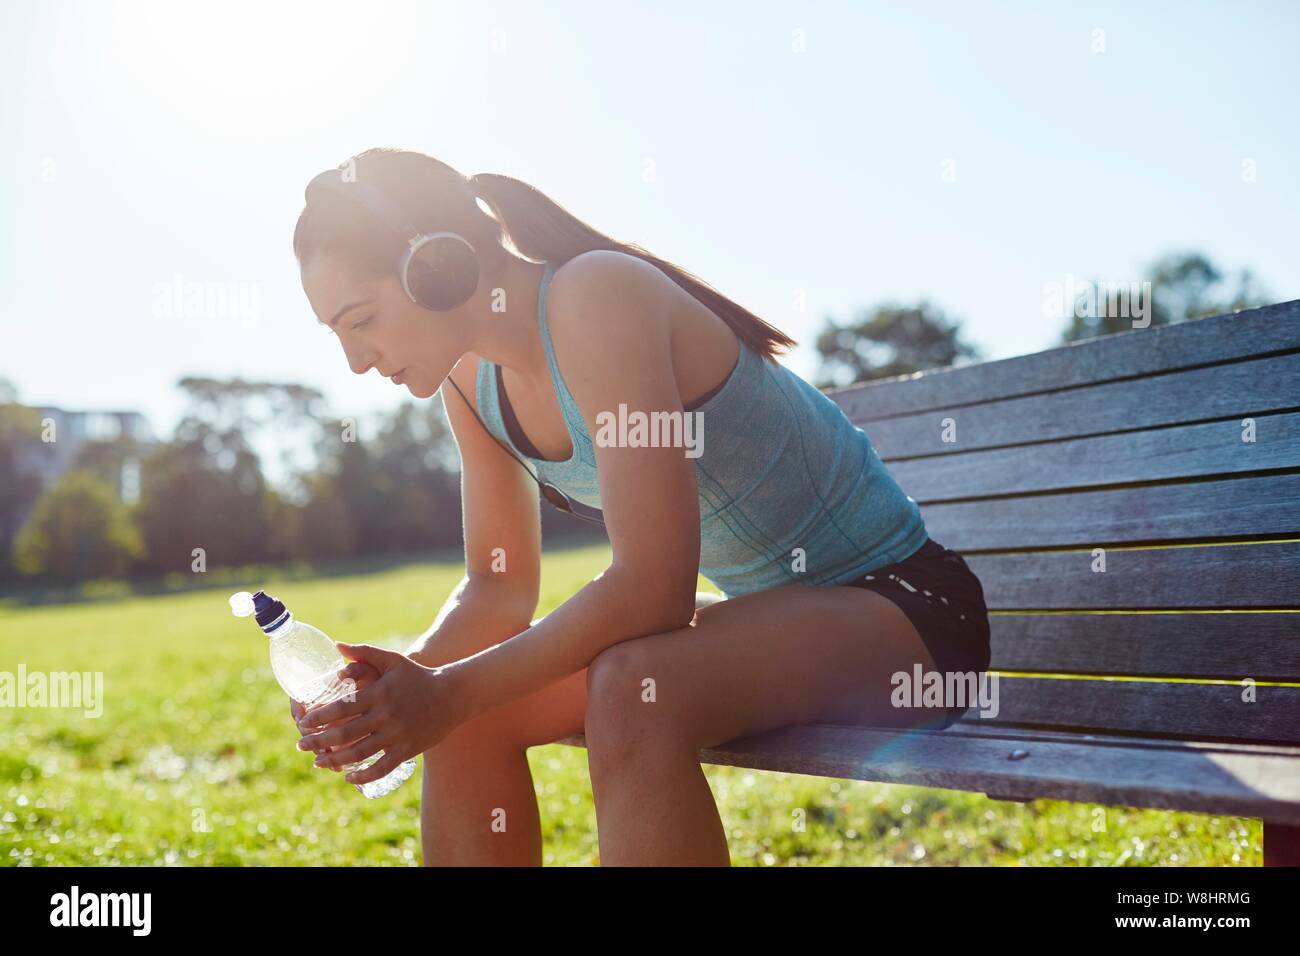 Young woman wearing headphones sitting on bench with bottle of water. Stock Photo